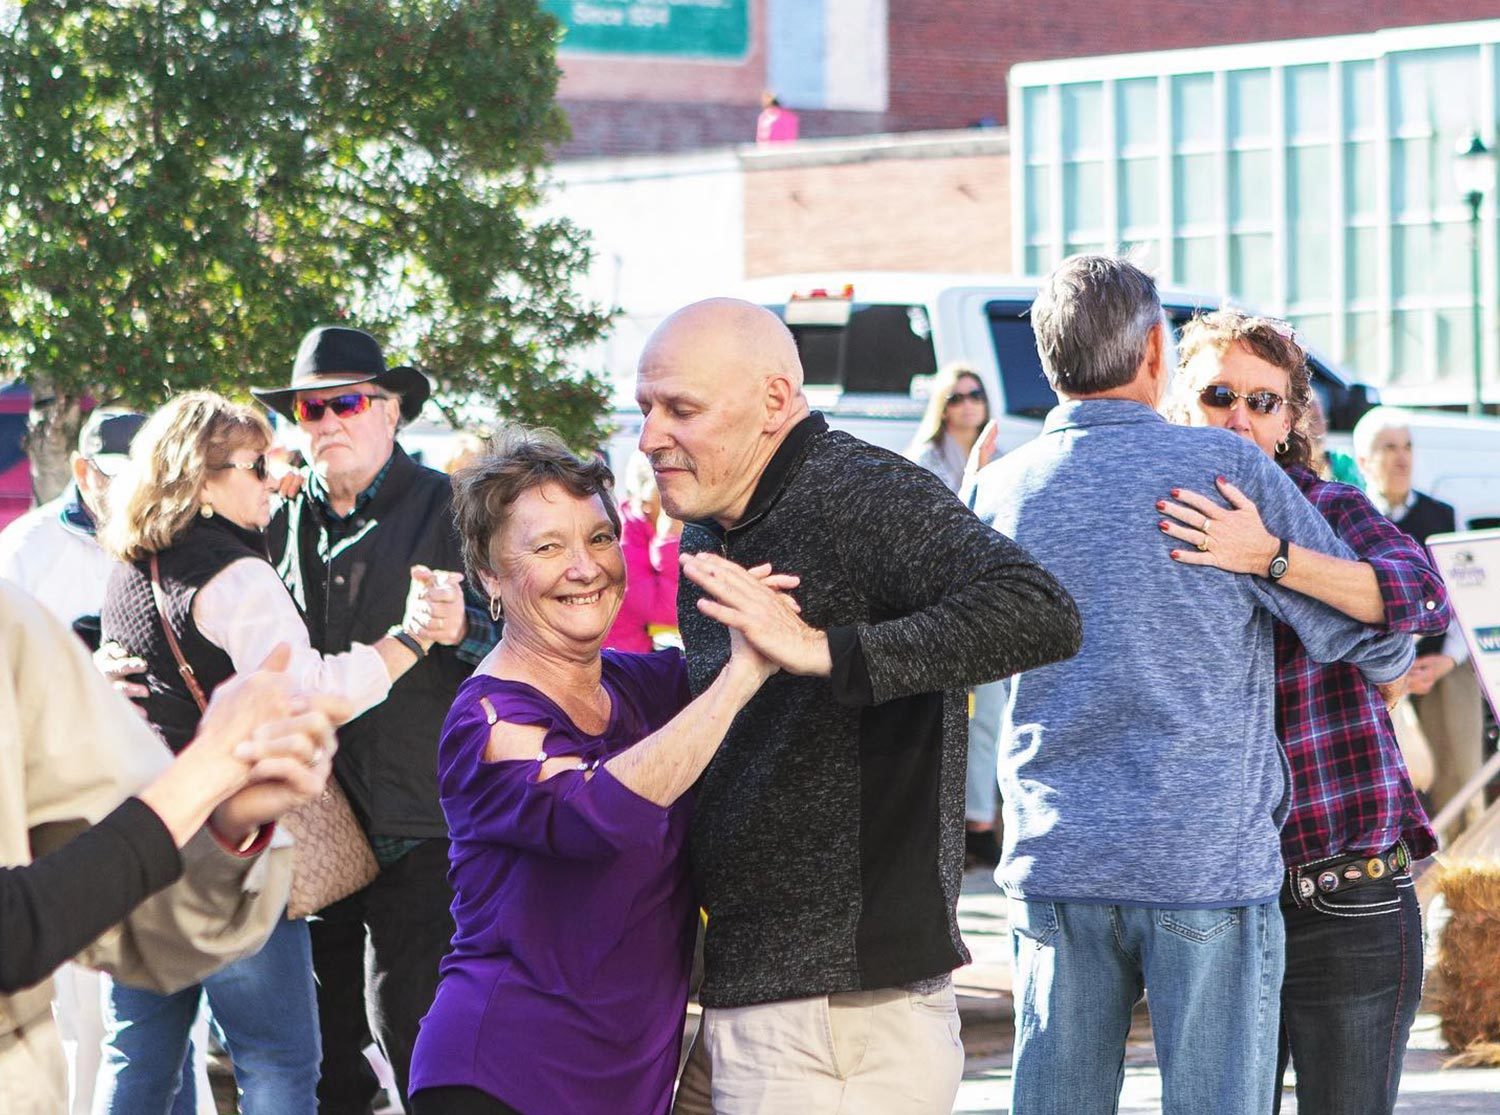 Retirees dancing outdoors at event in Wilson, NC - Discover Wilson